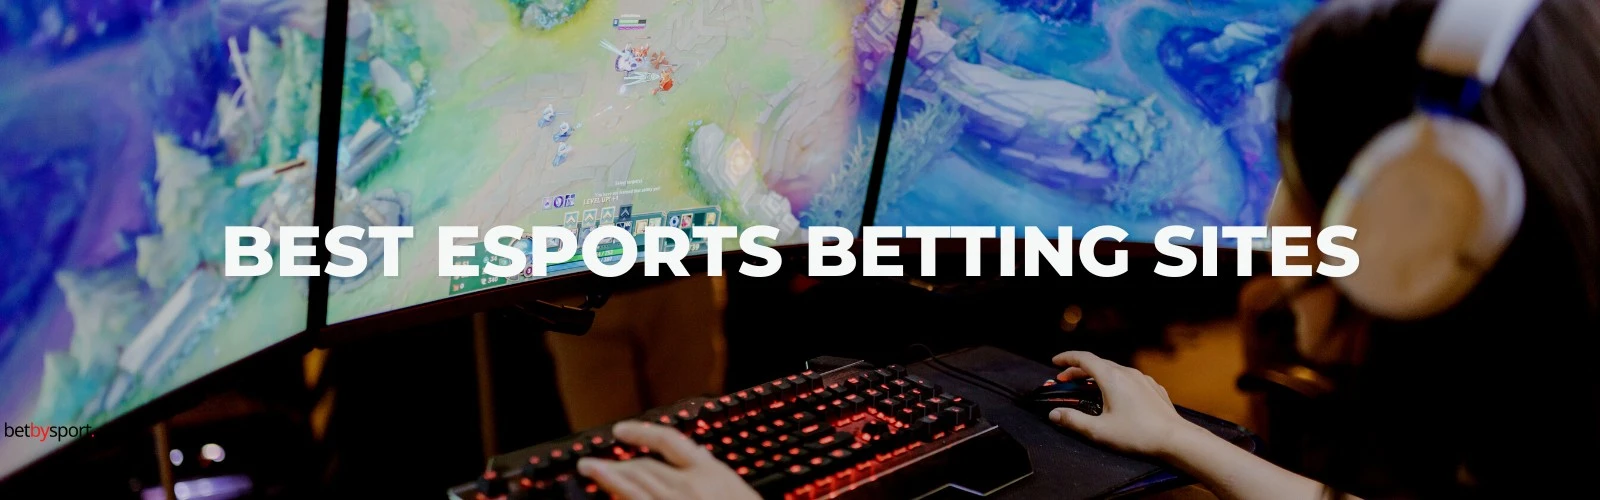 Best Esports betting sites in the UK